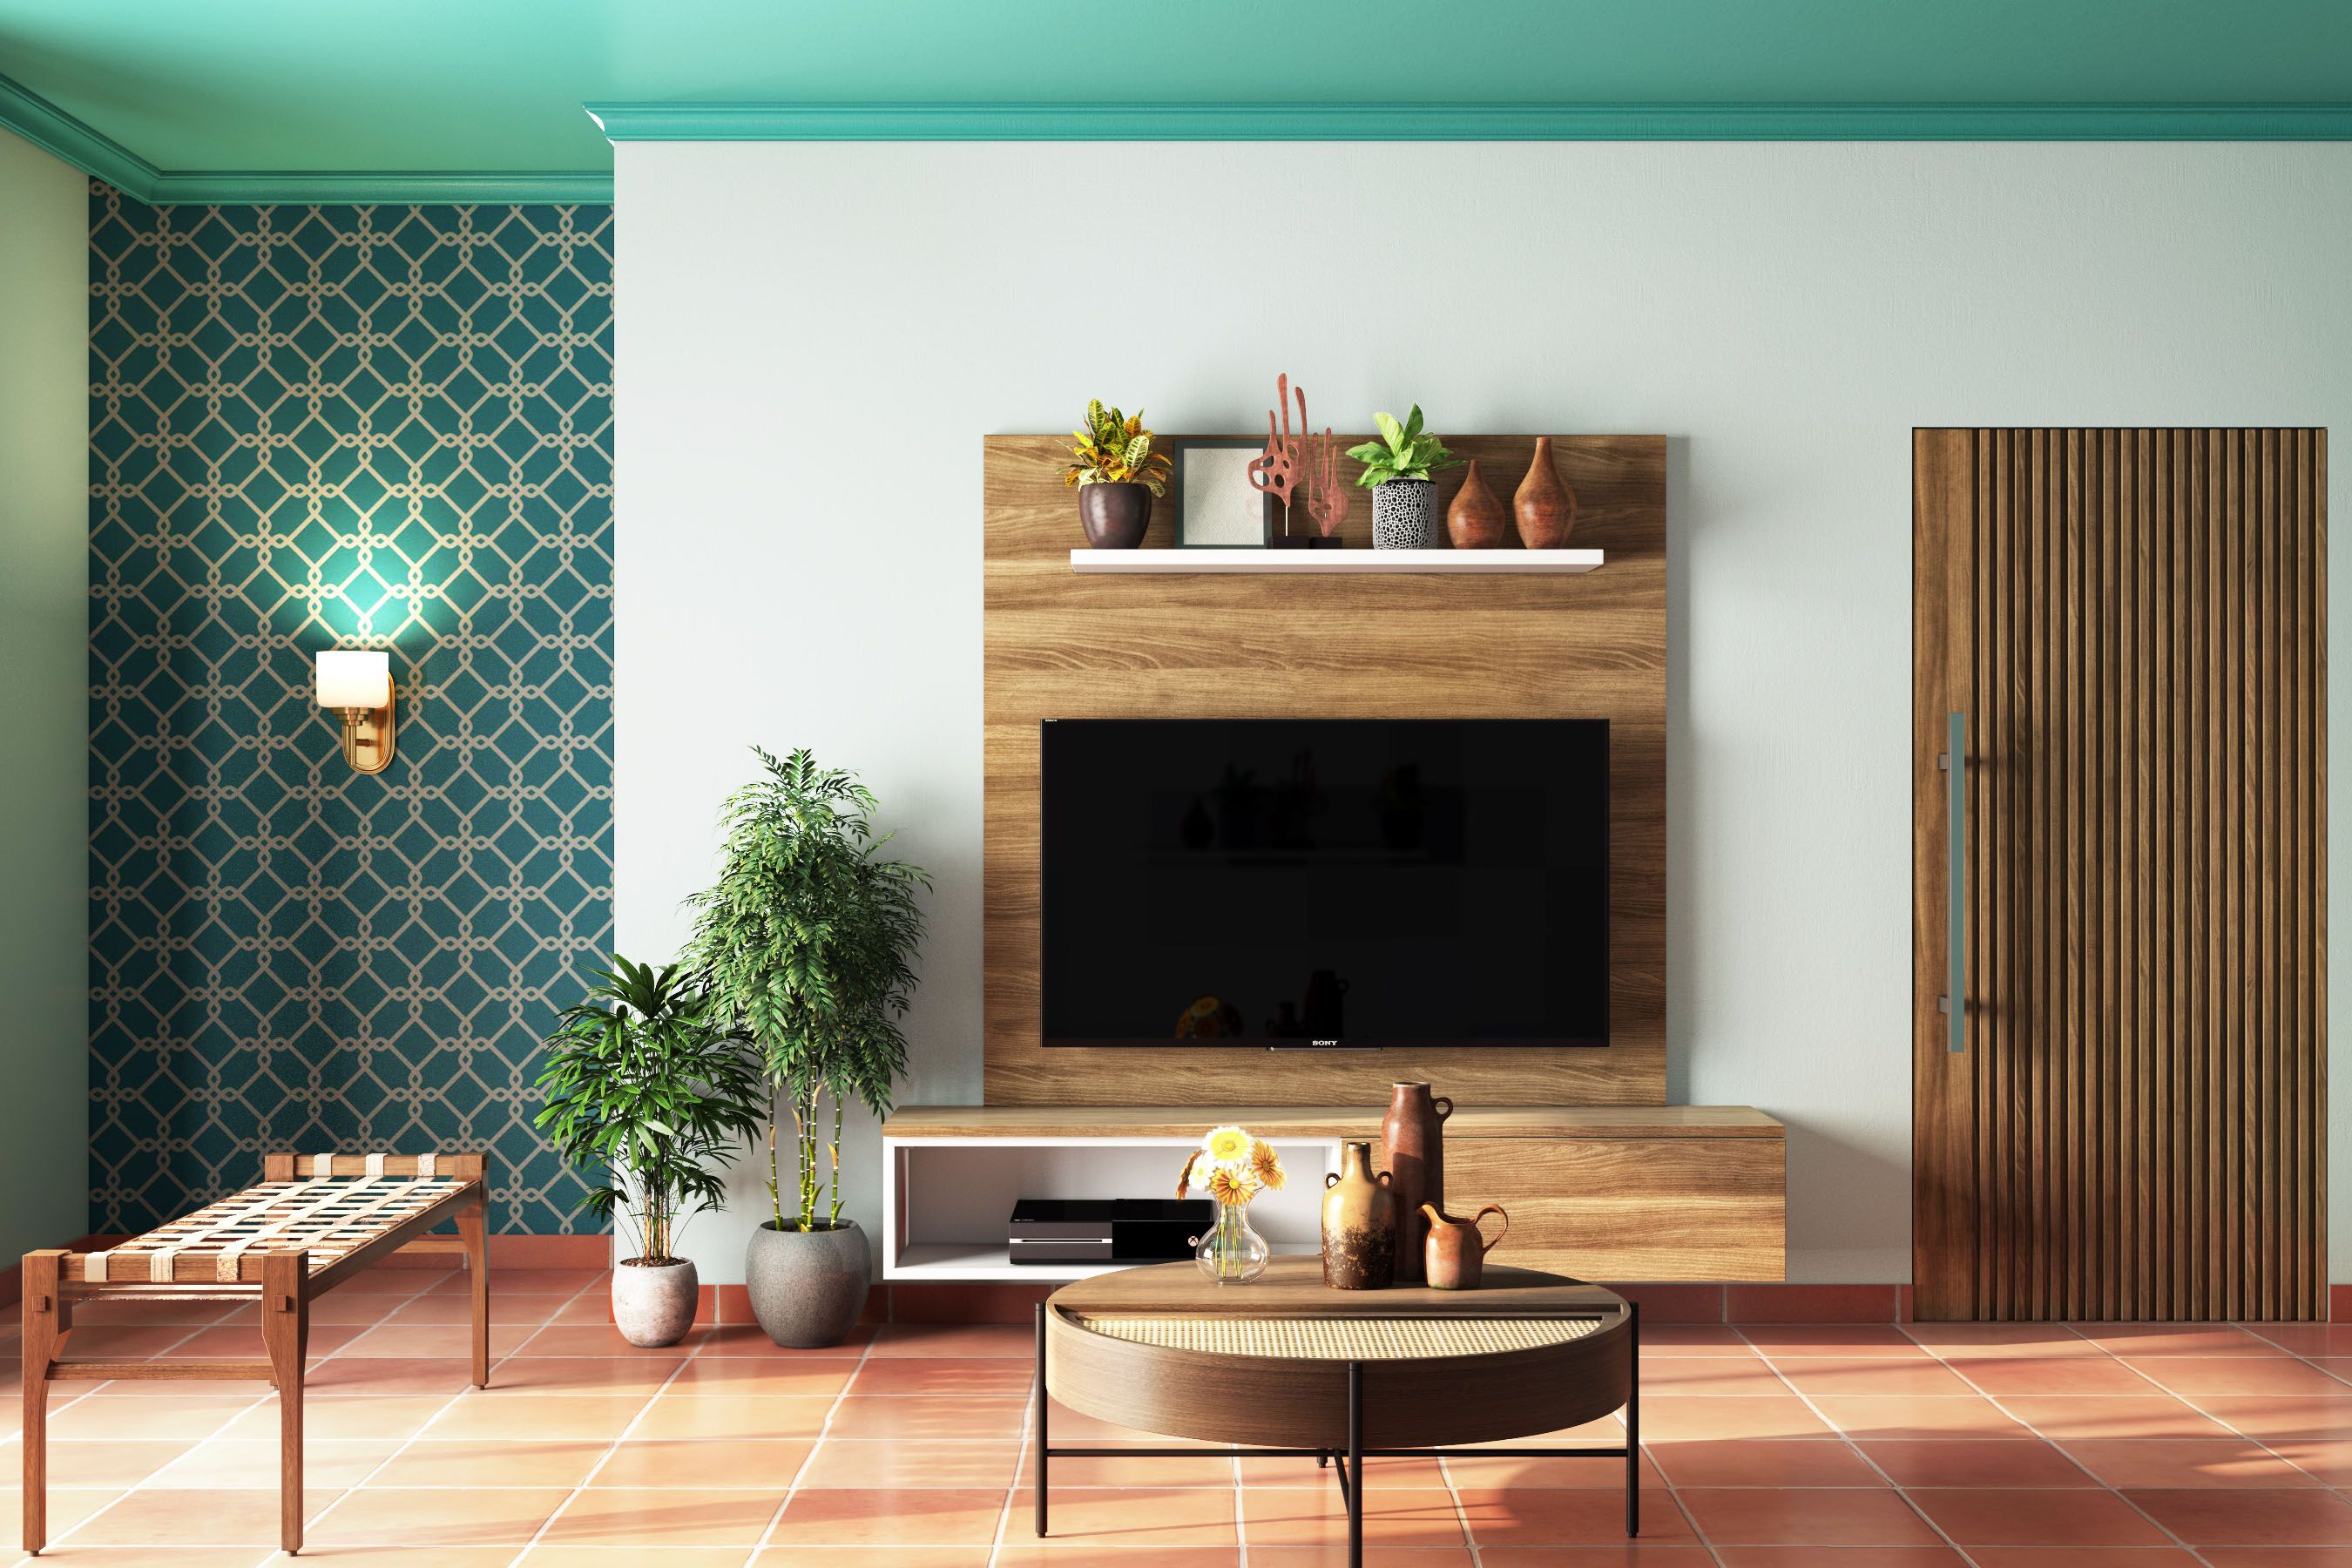 Mid-Century Modern Wood And White TV Unit Design With Geometric Green Accent Wall